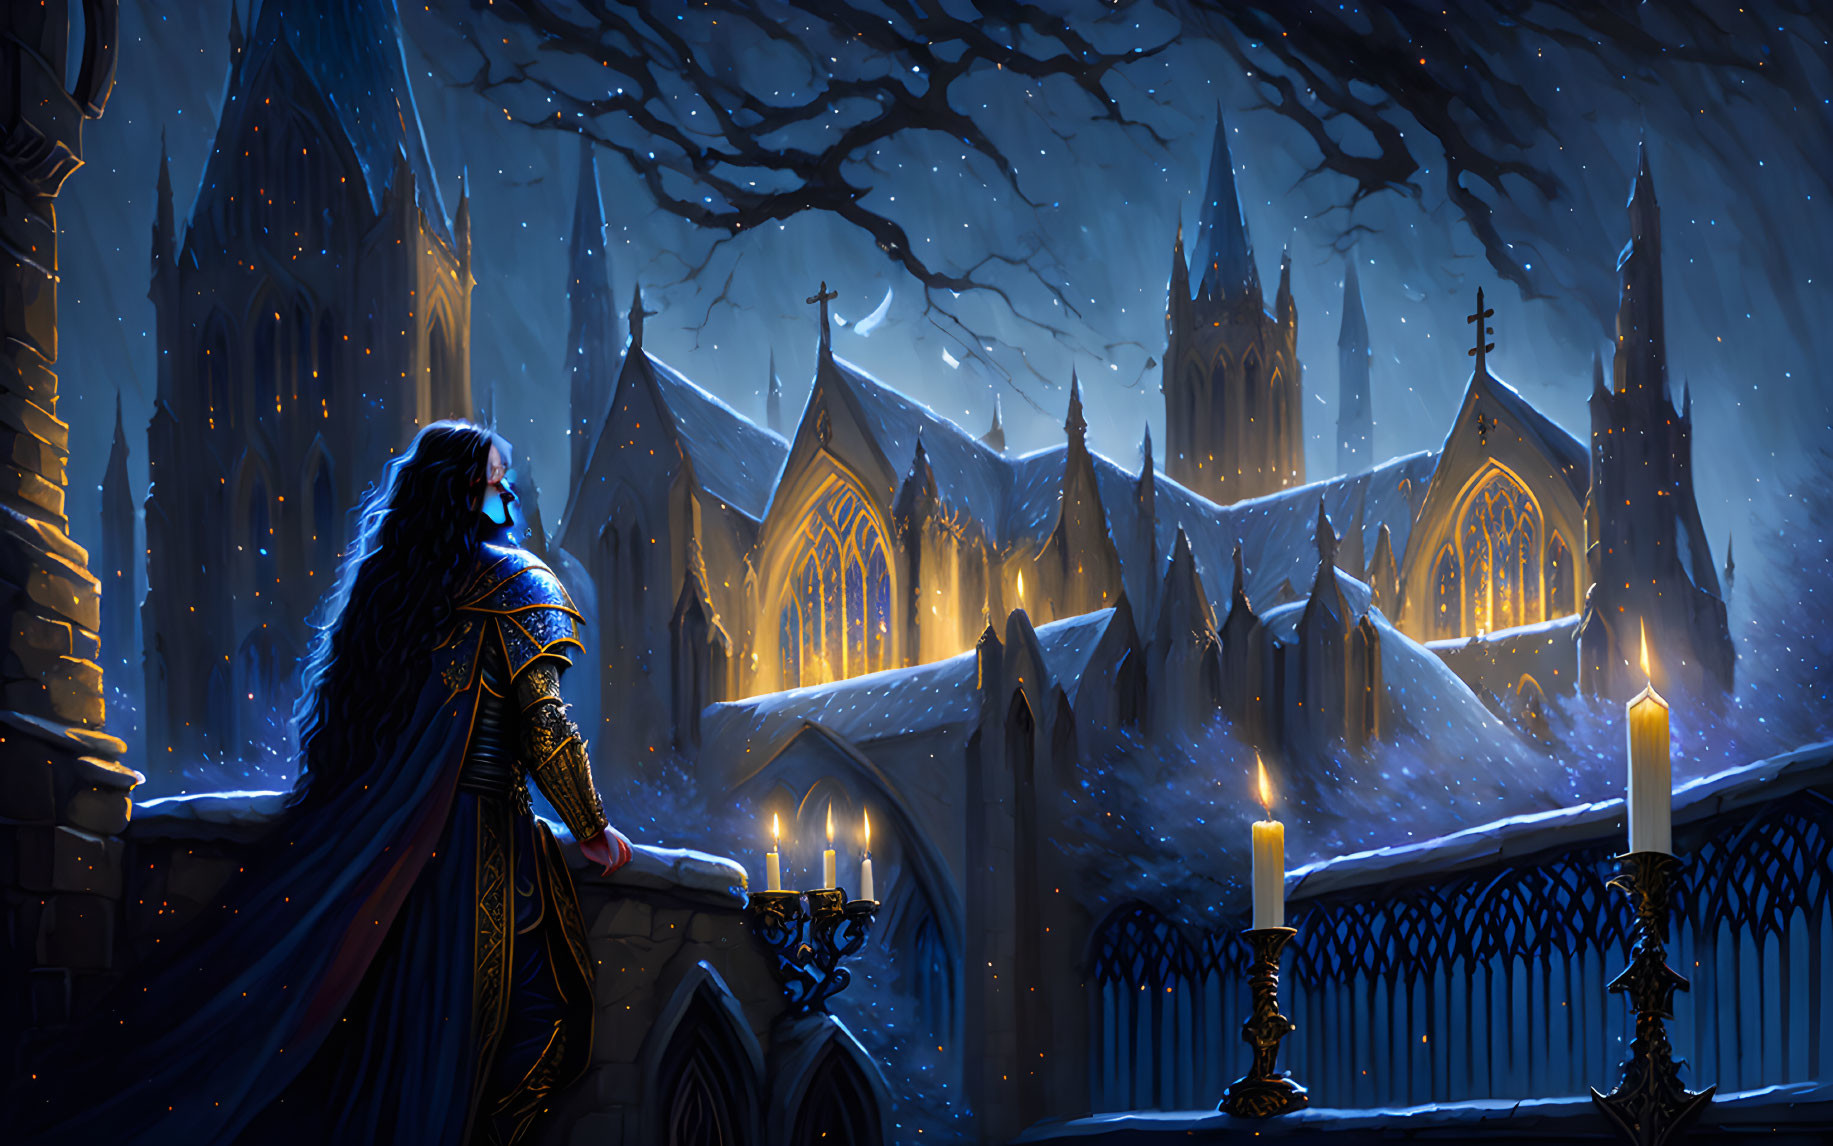 Cloaked figure on balcony overlooking snow-covered cathedral at night